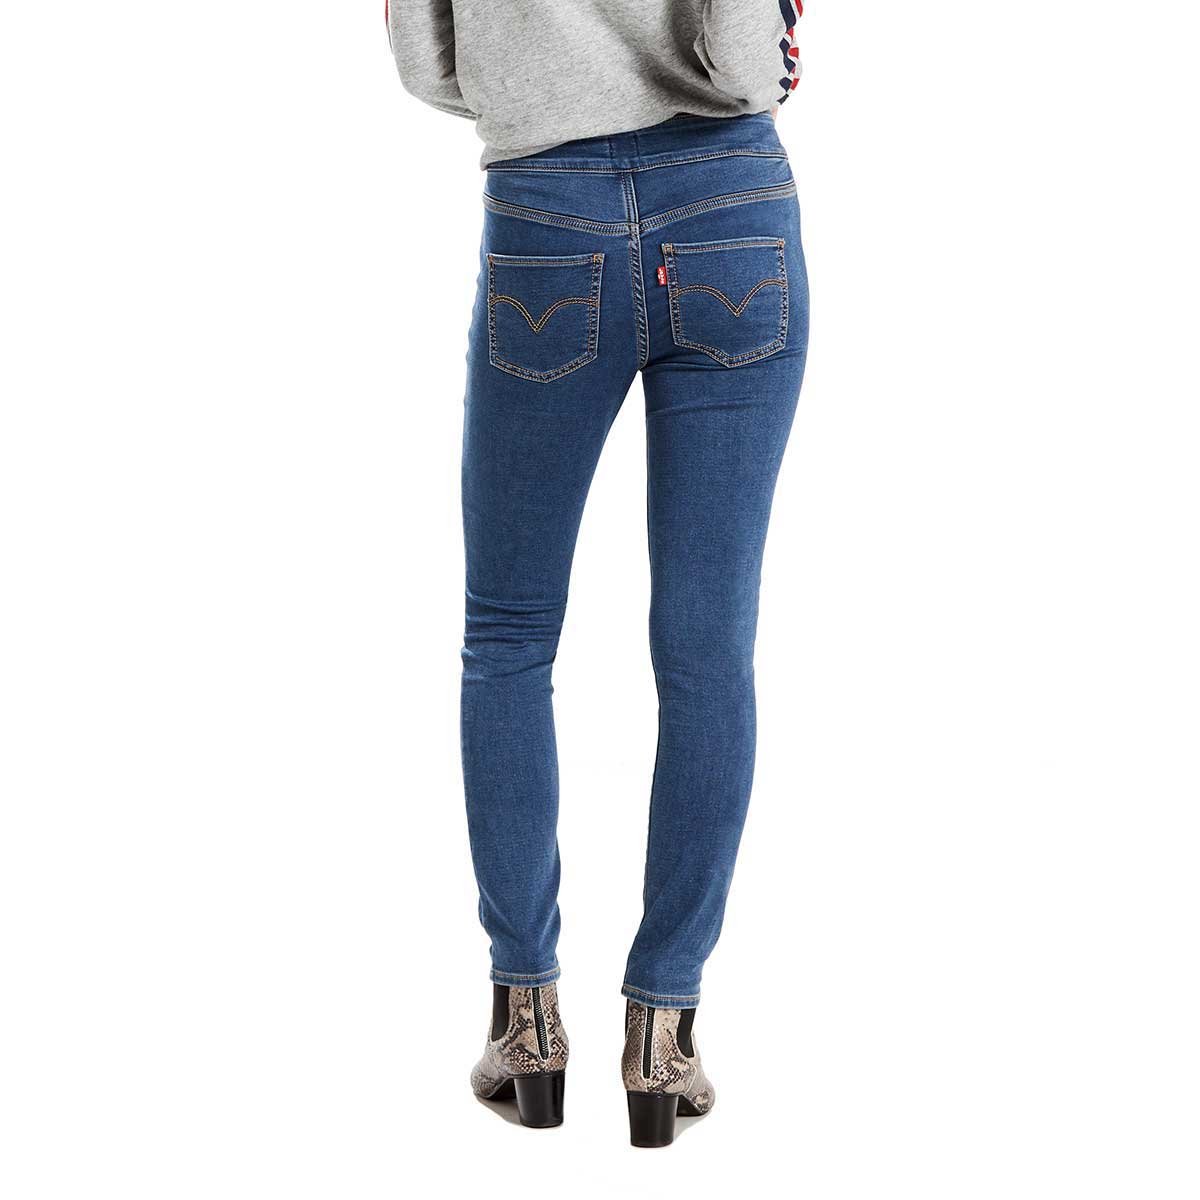 On The Move Skinny Soft Levis® Misses